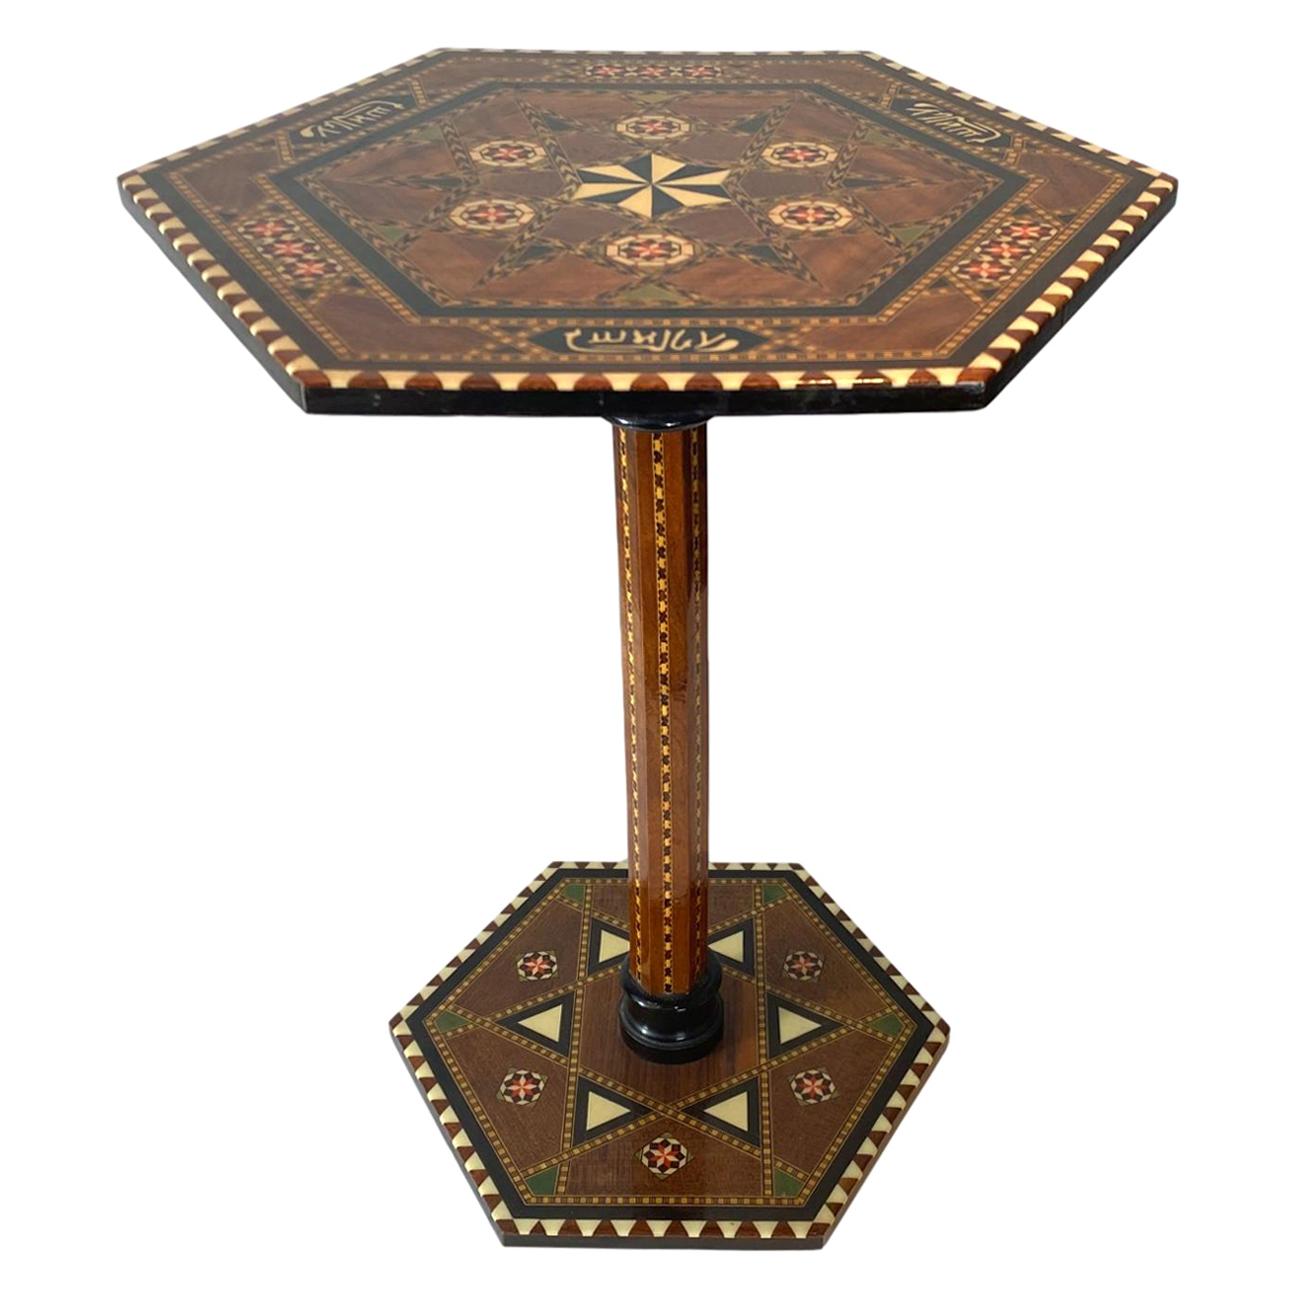 Syrian Hexagonal Table/Stand with Profuse and Exotic Detailed Inlays